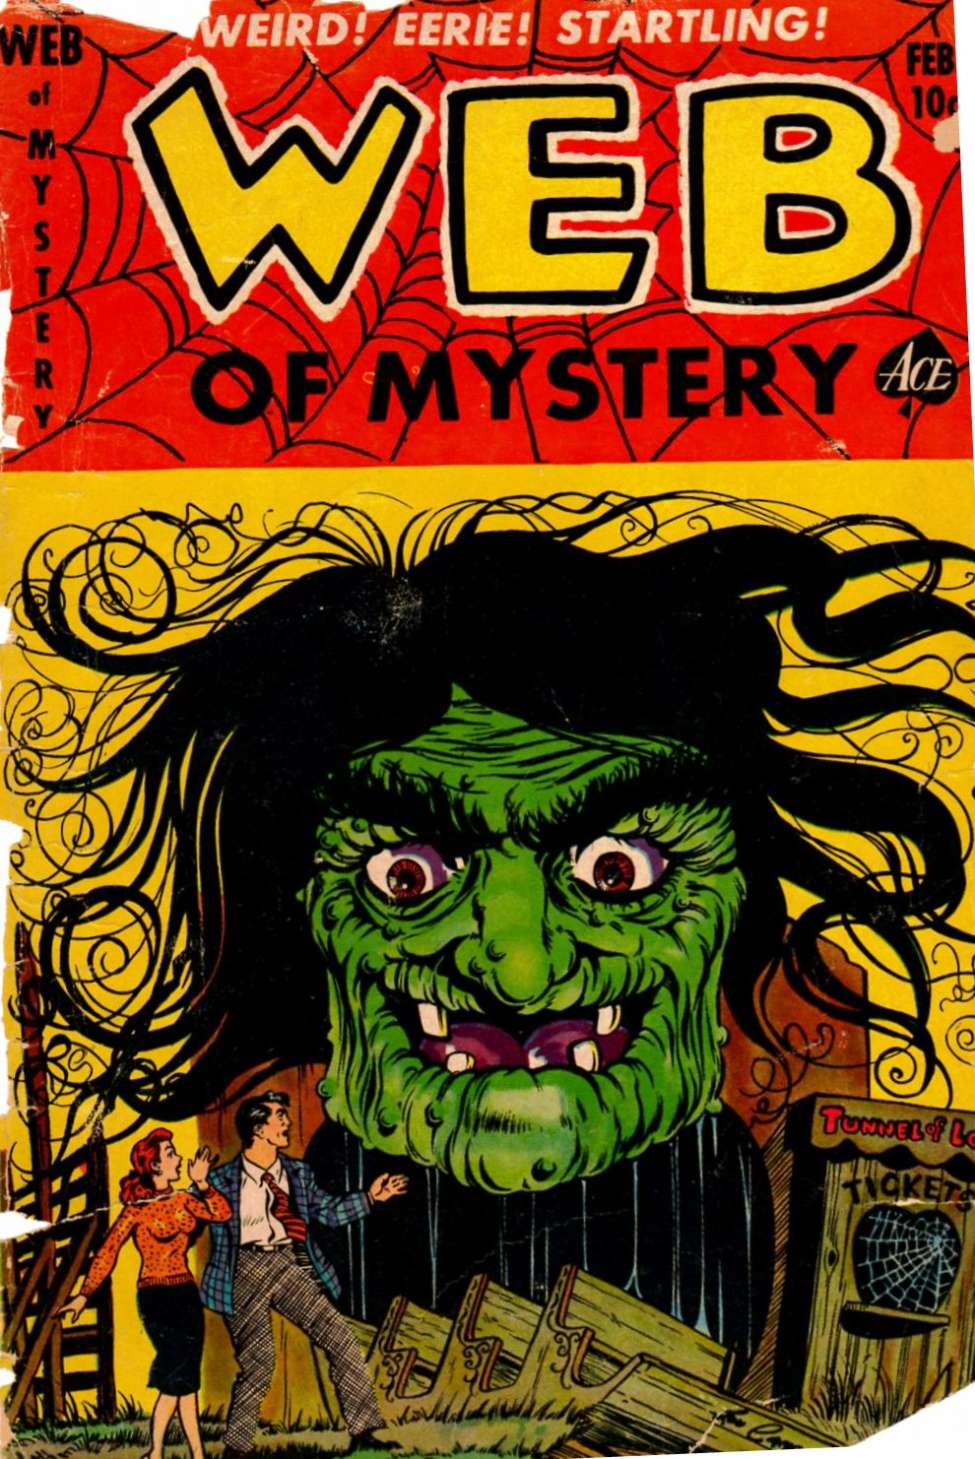 Book Cover For Web of Mystery 17 - Version 1